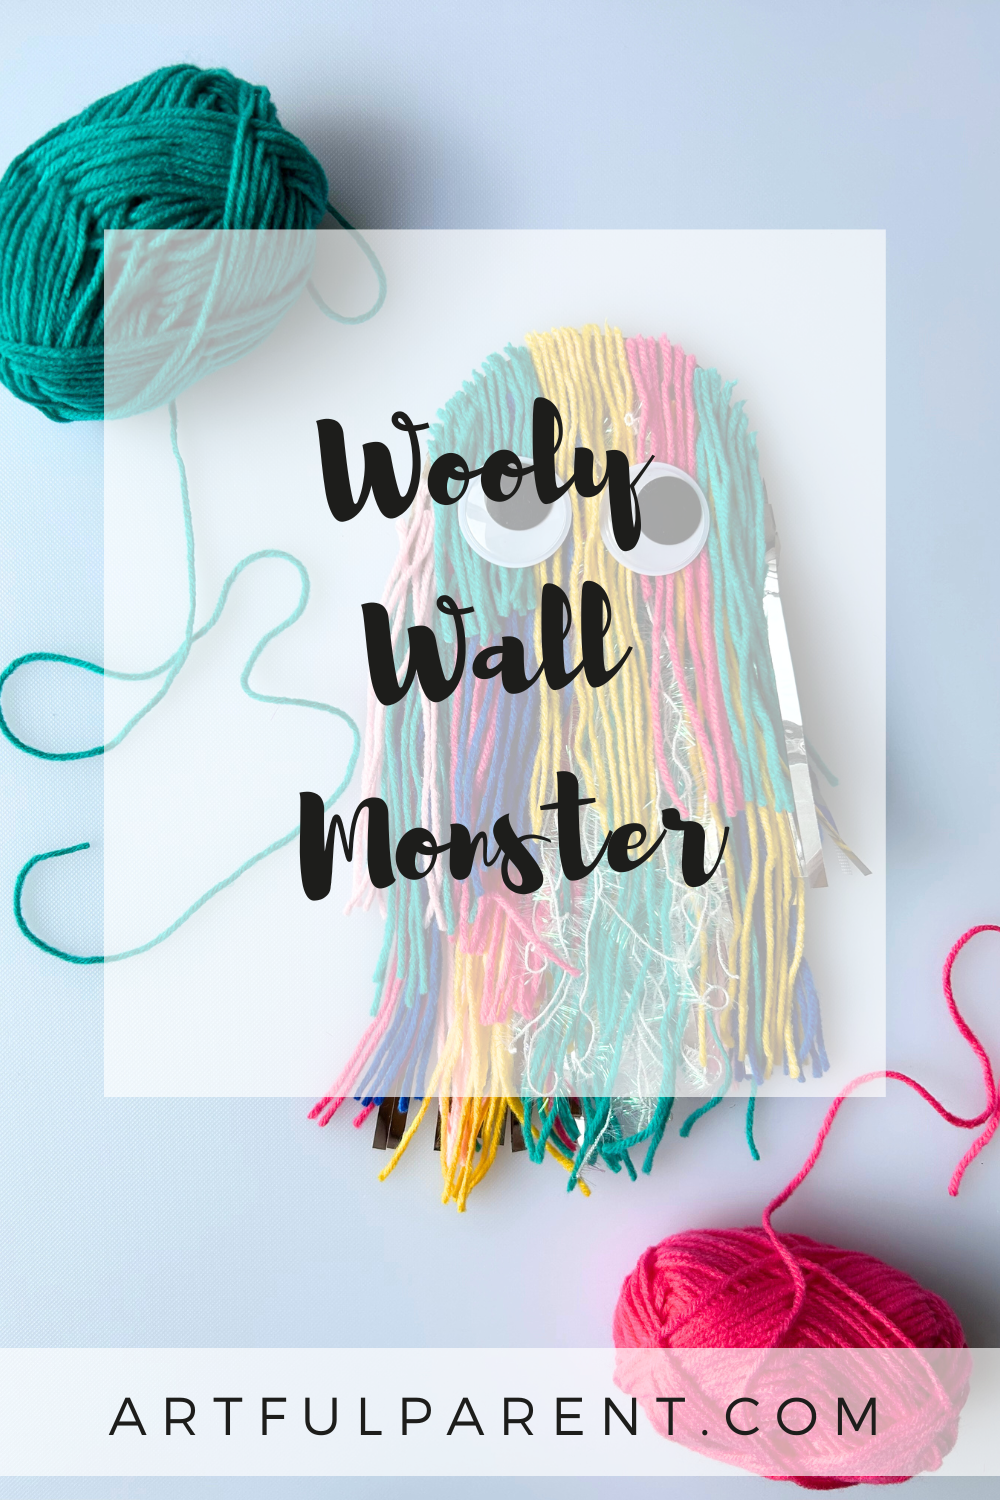 How to Make a Wooly Yarn Wall Hanging for Kids